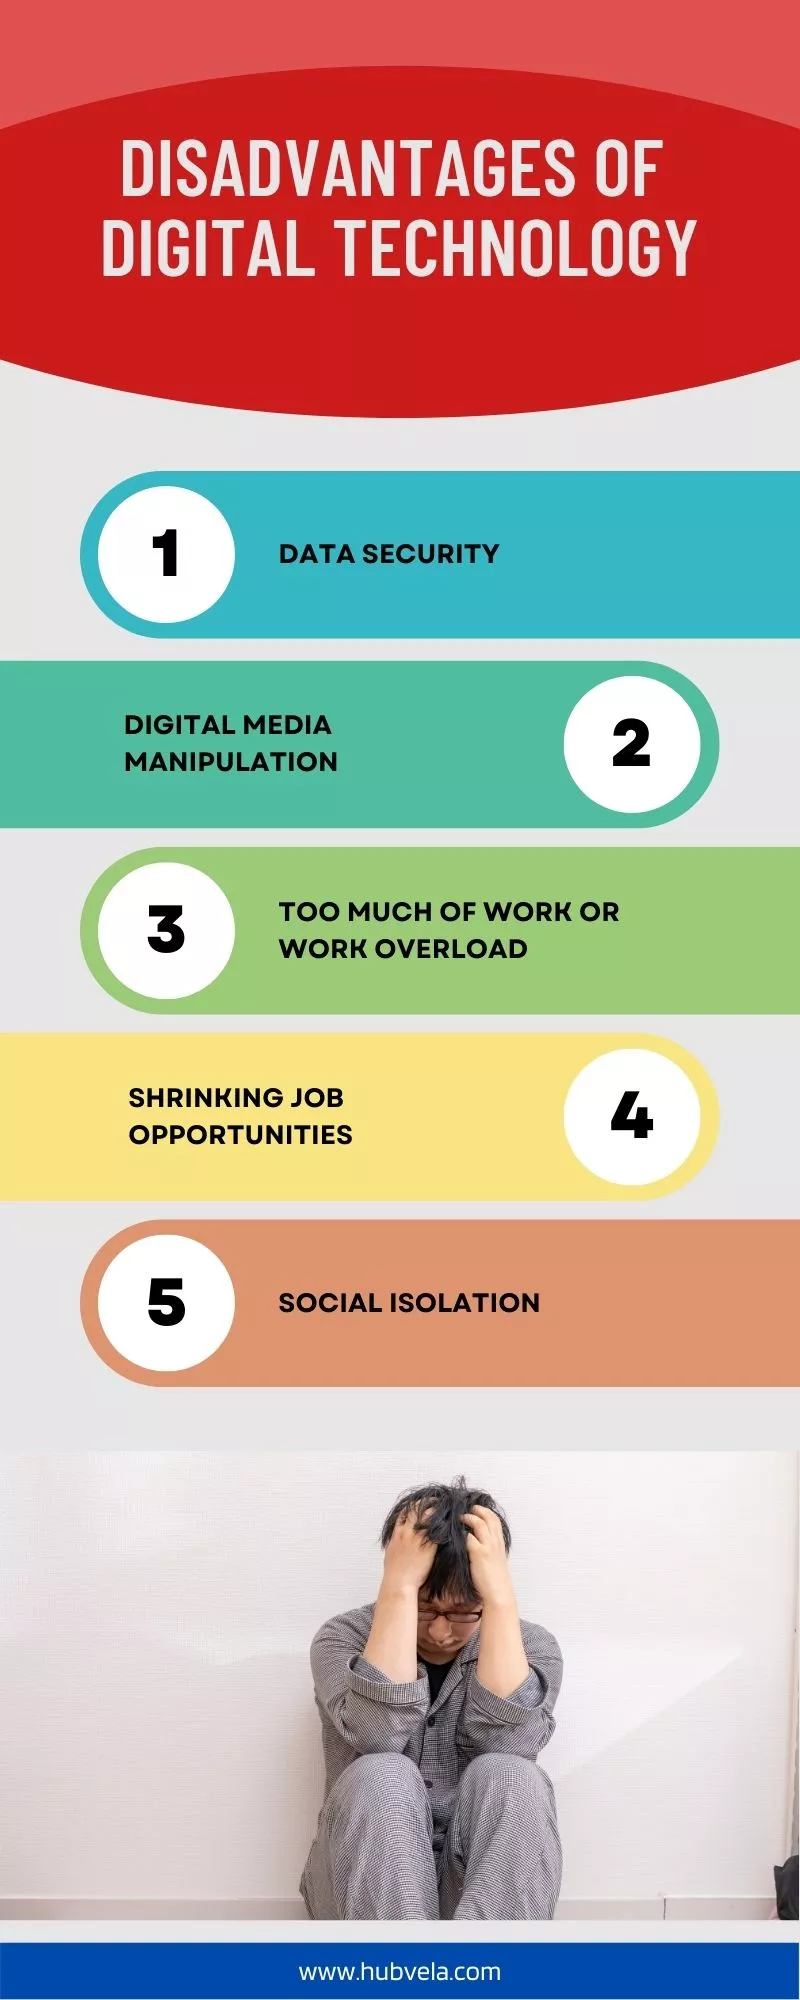 Disadvantages of Digital Technology Infographic